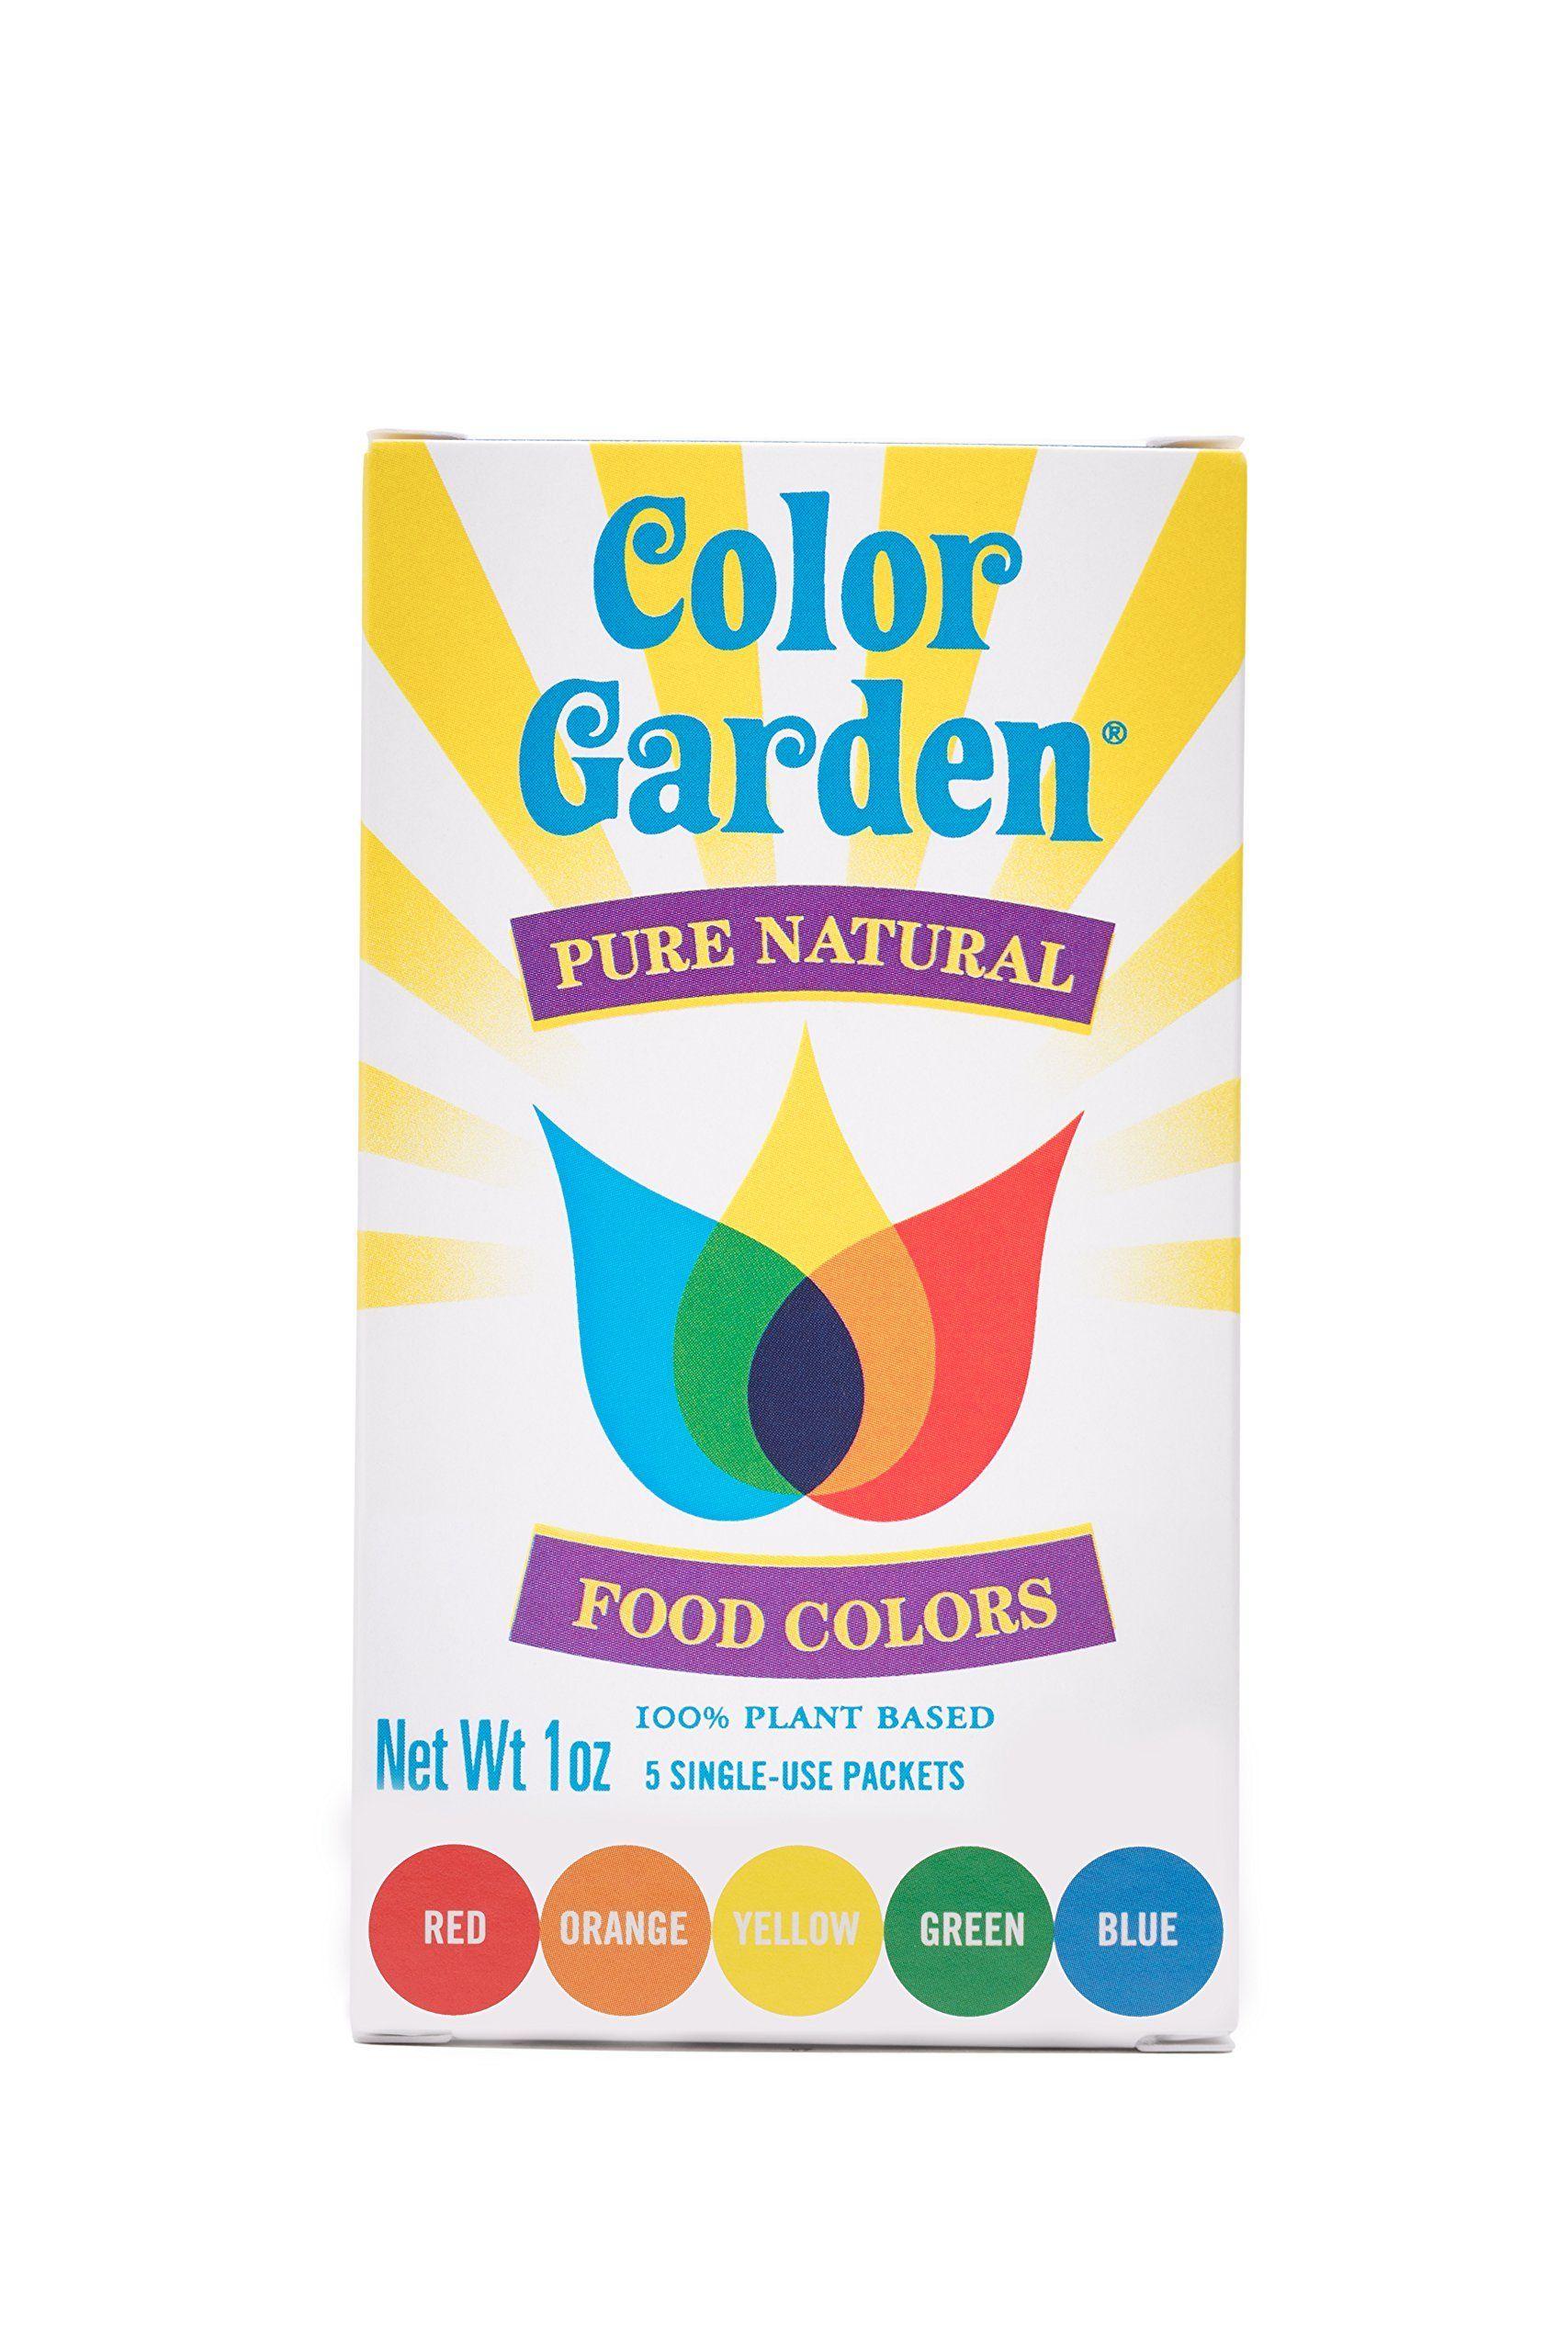 Green Food Colored Logo - Amazon.com : Color Garden Pure Natural Food Colors, Multi Pack 5 ct ...